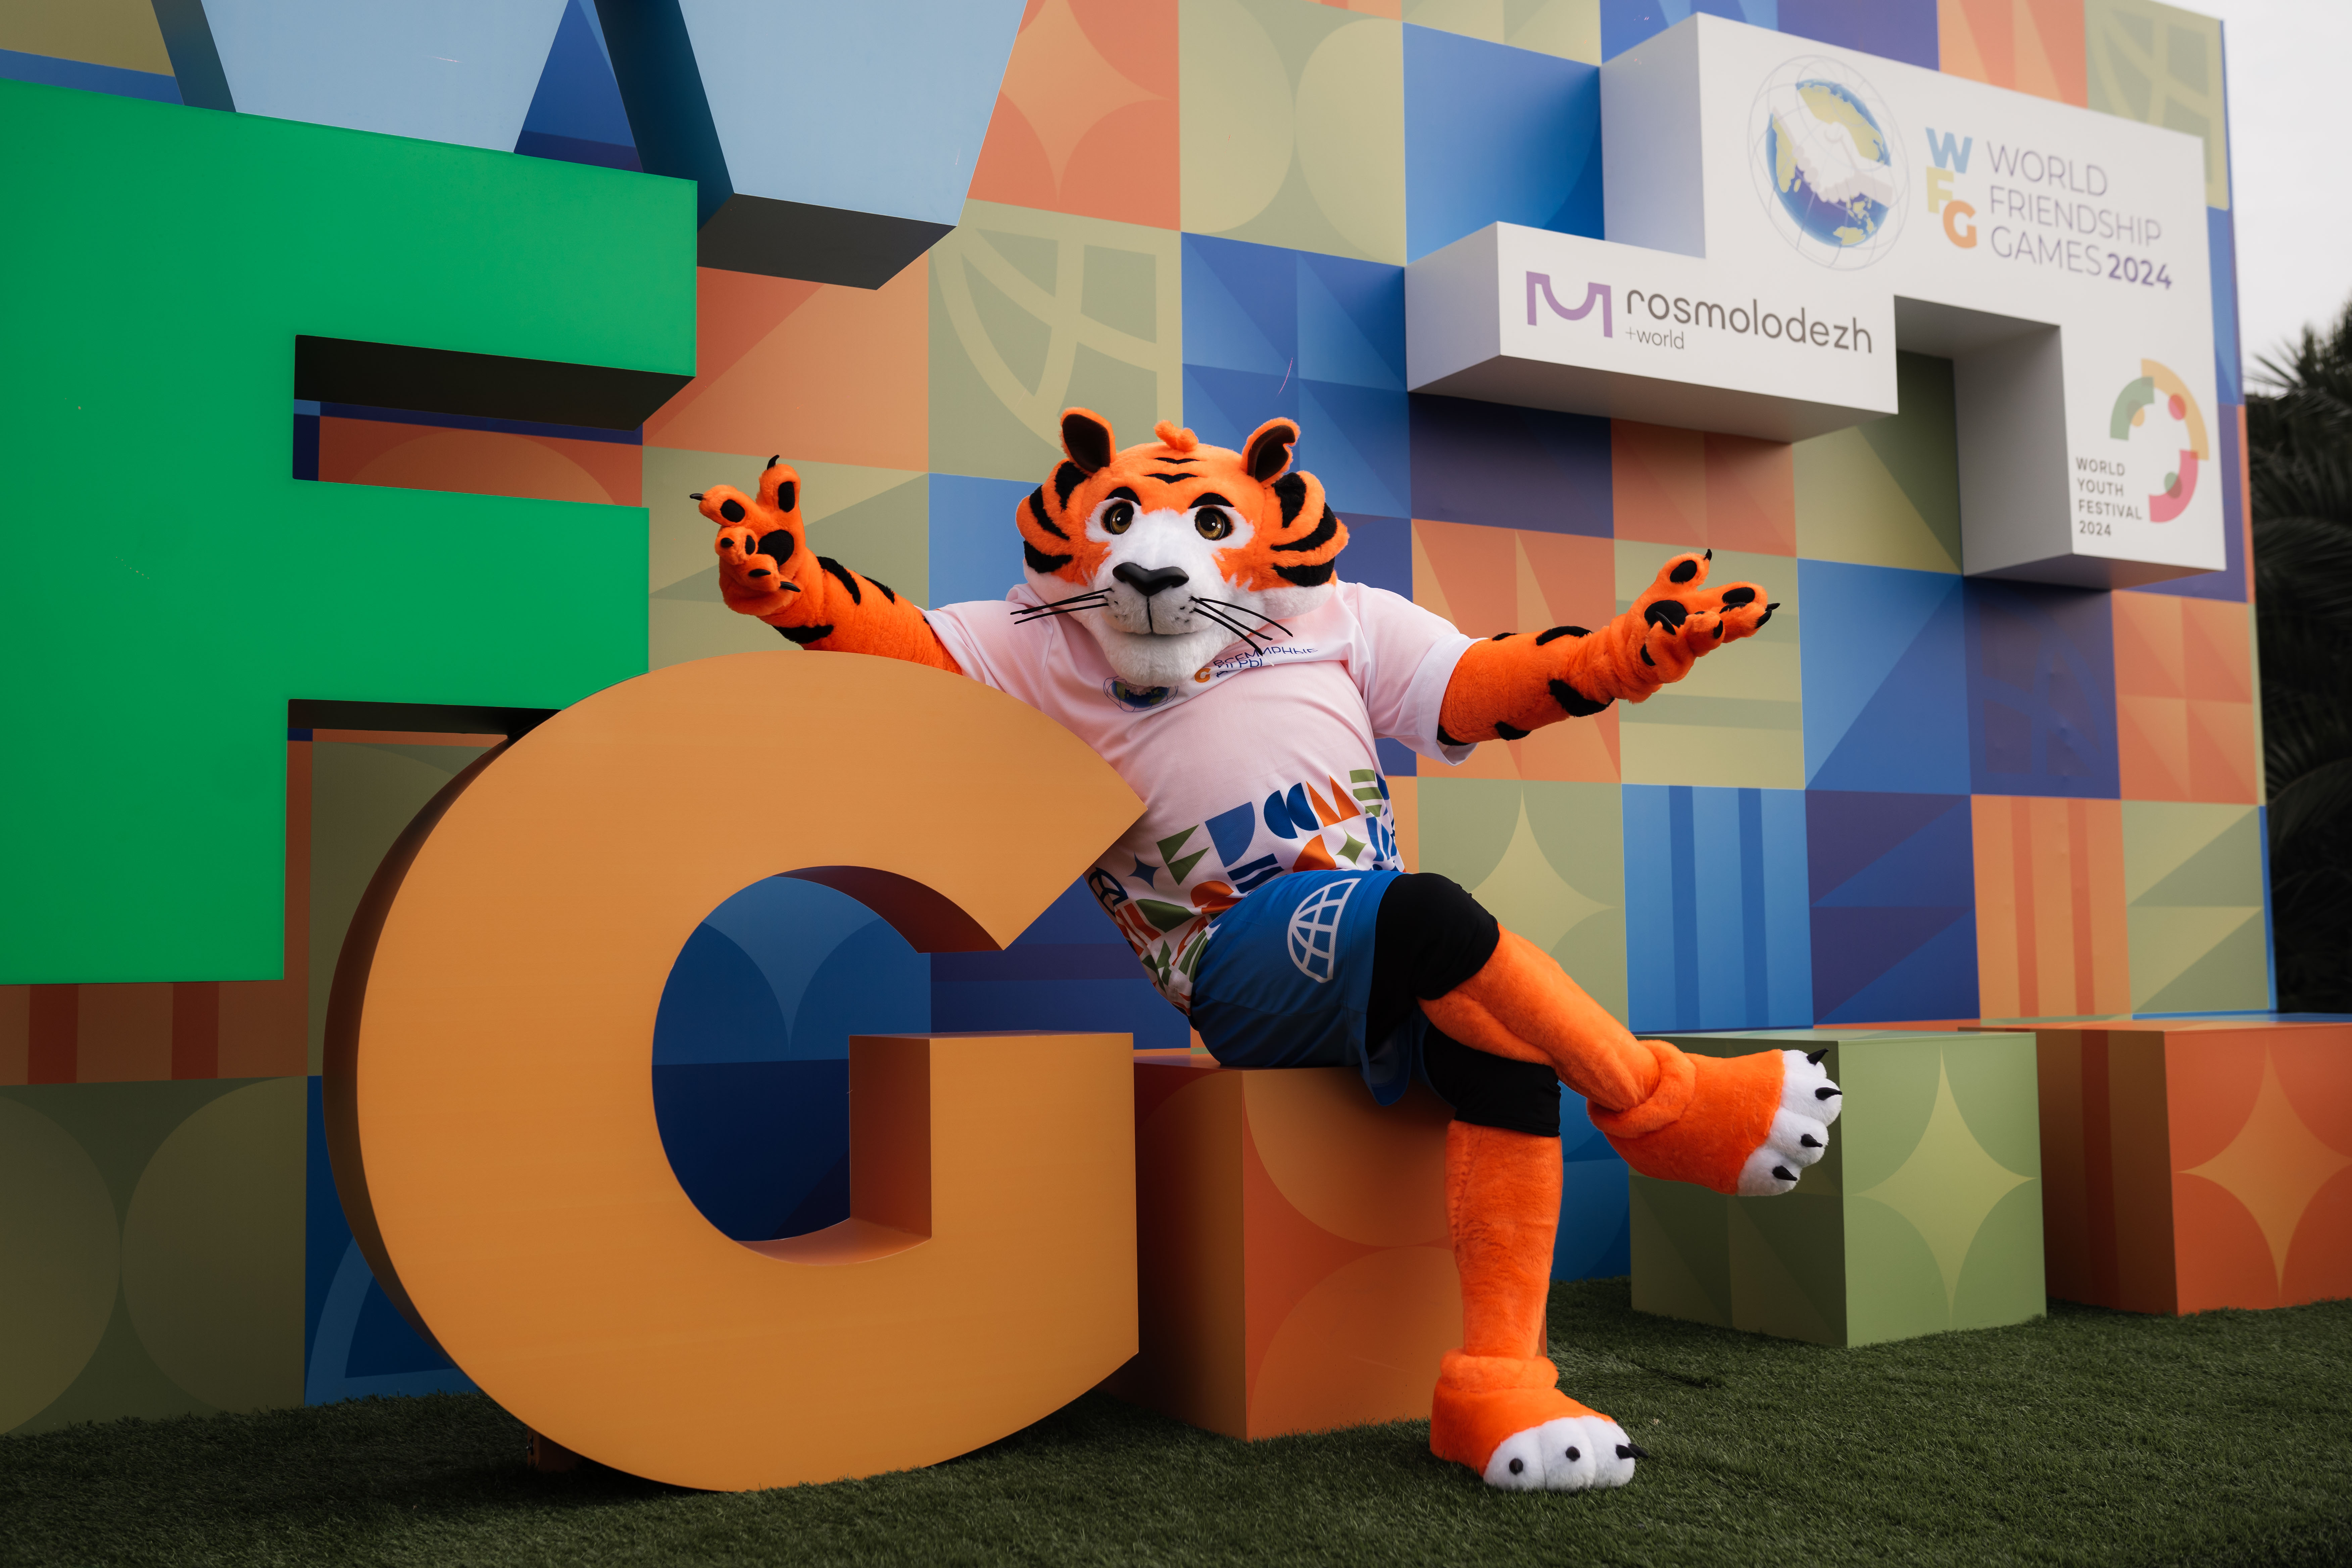 Tiger Becomes the World Friendship Games 2024 Mascot